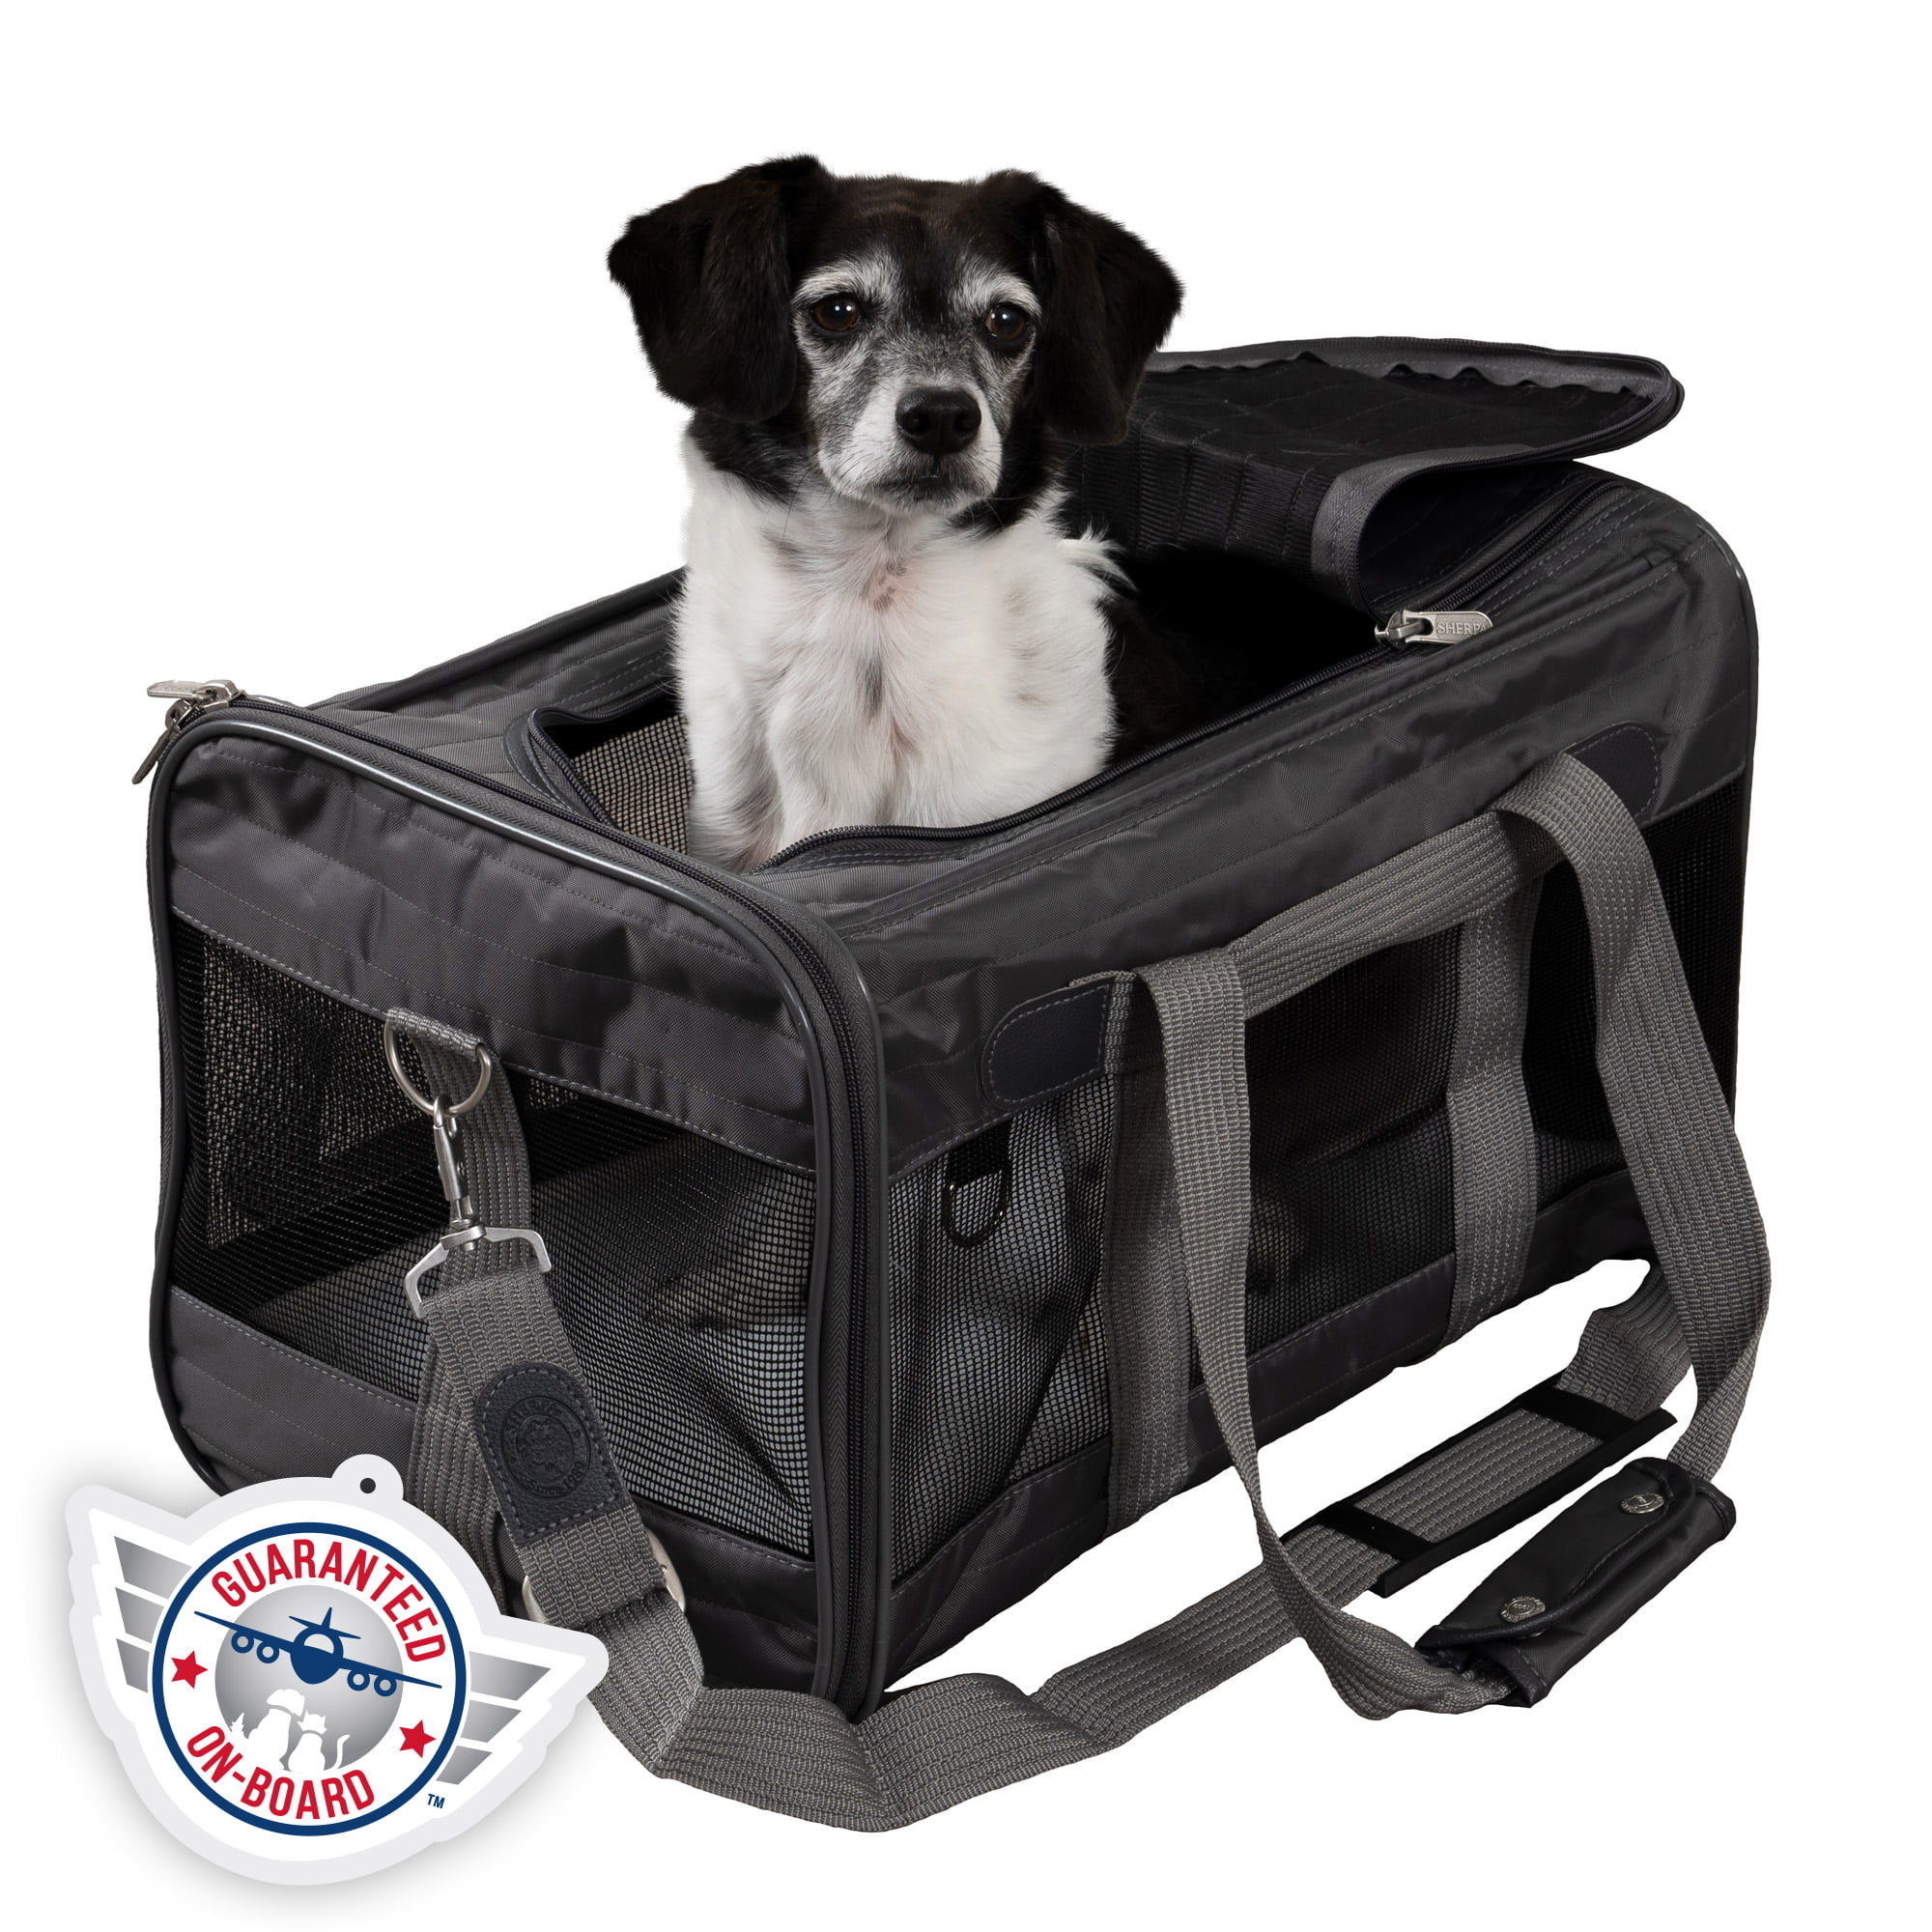 Sherpa Original Deluxe Travel Pet Carrier, Airline Approved, Charcoal, Large,  Large - Fry's Food Stores